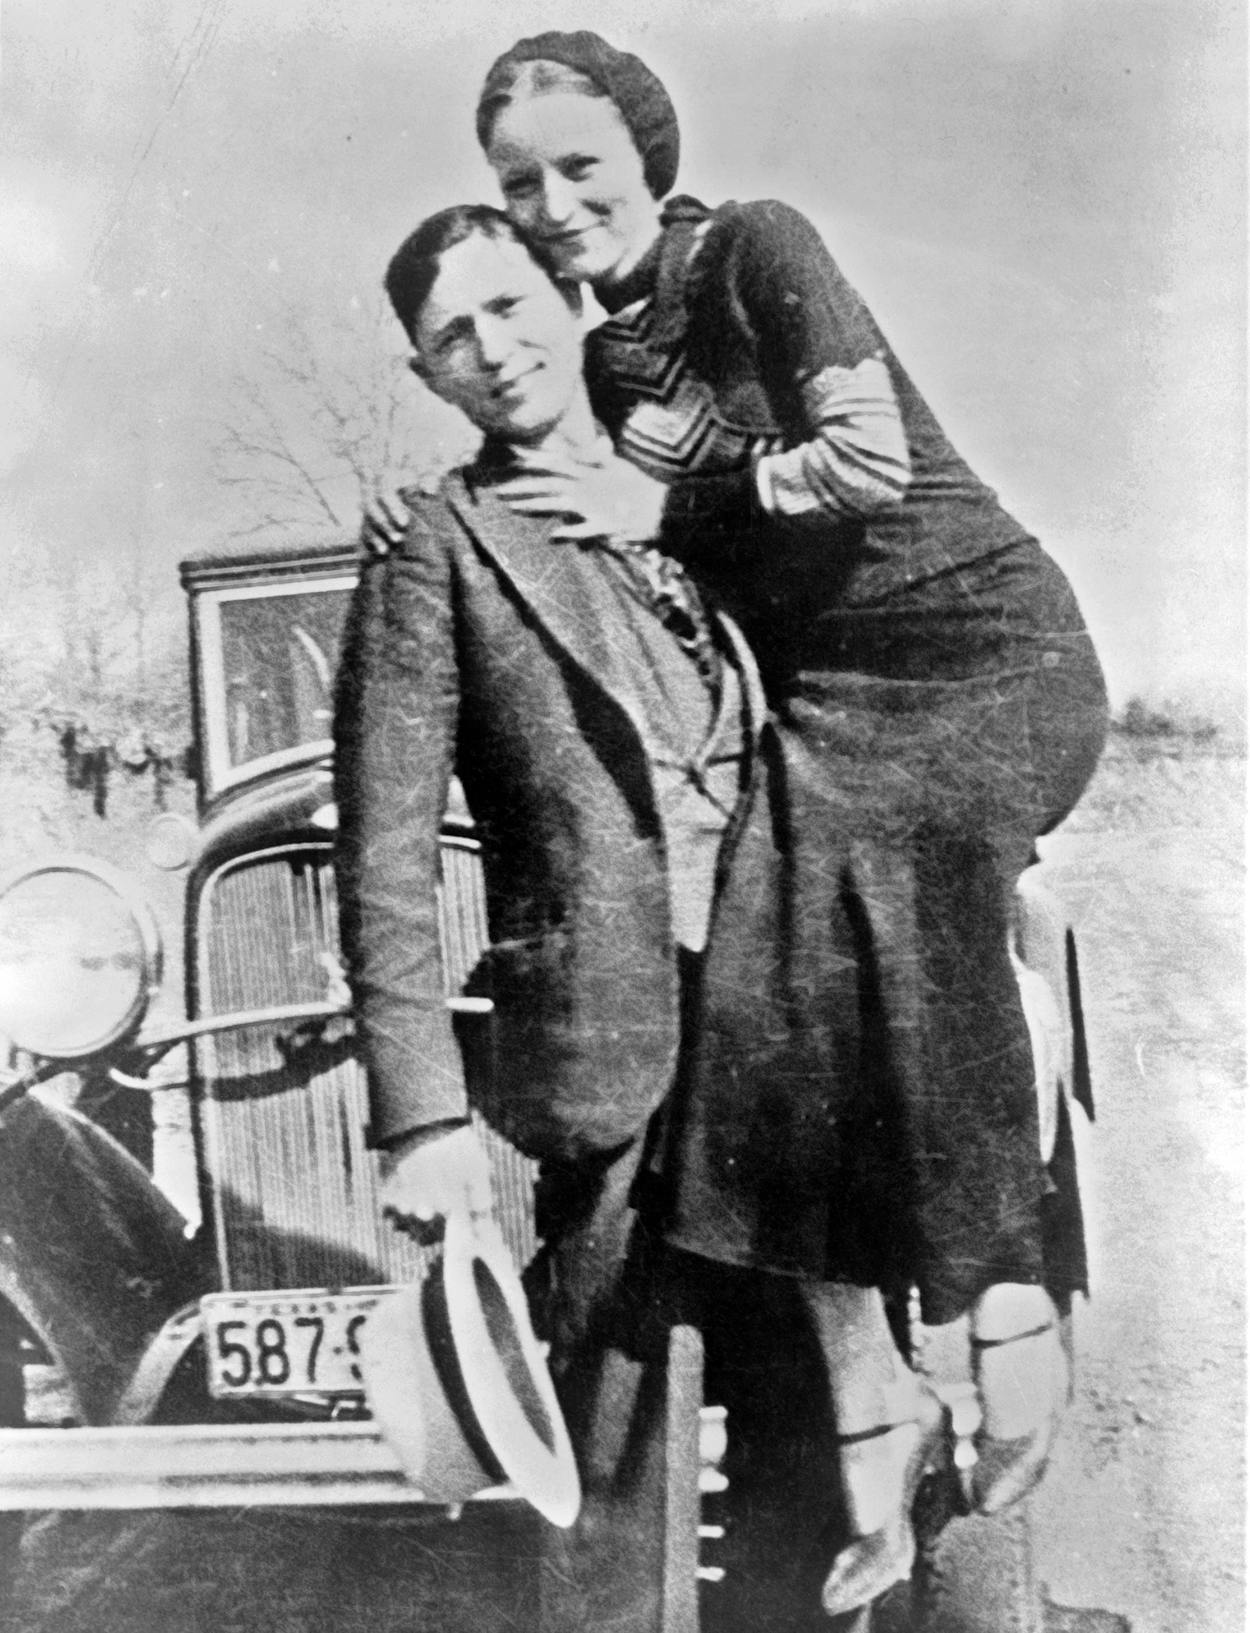 Clyde holding Bonnie in black and white photograph.